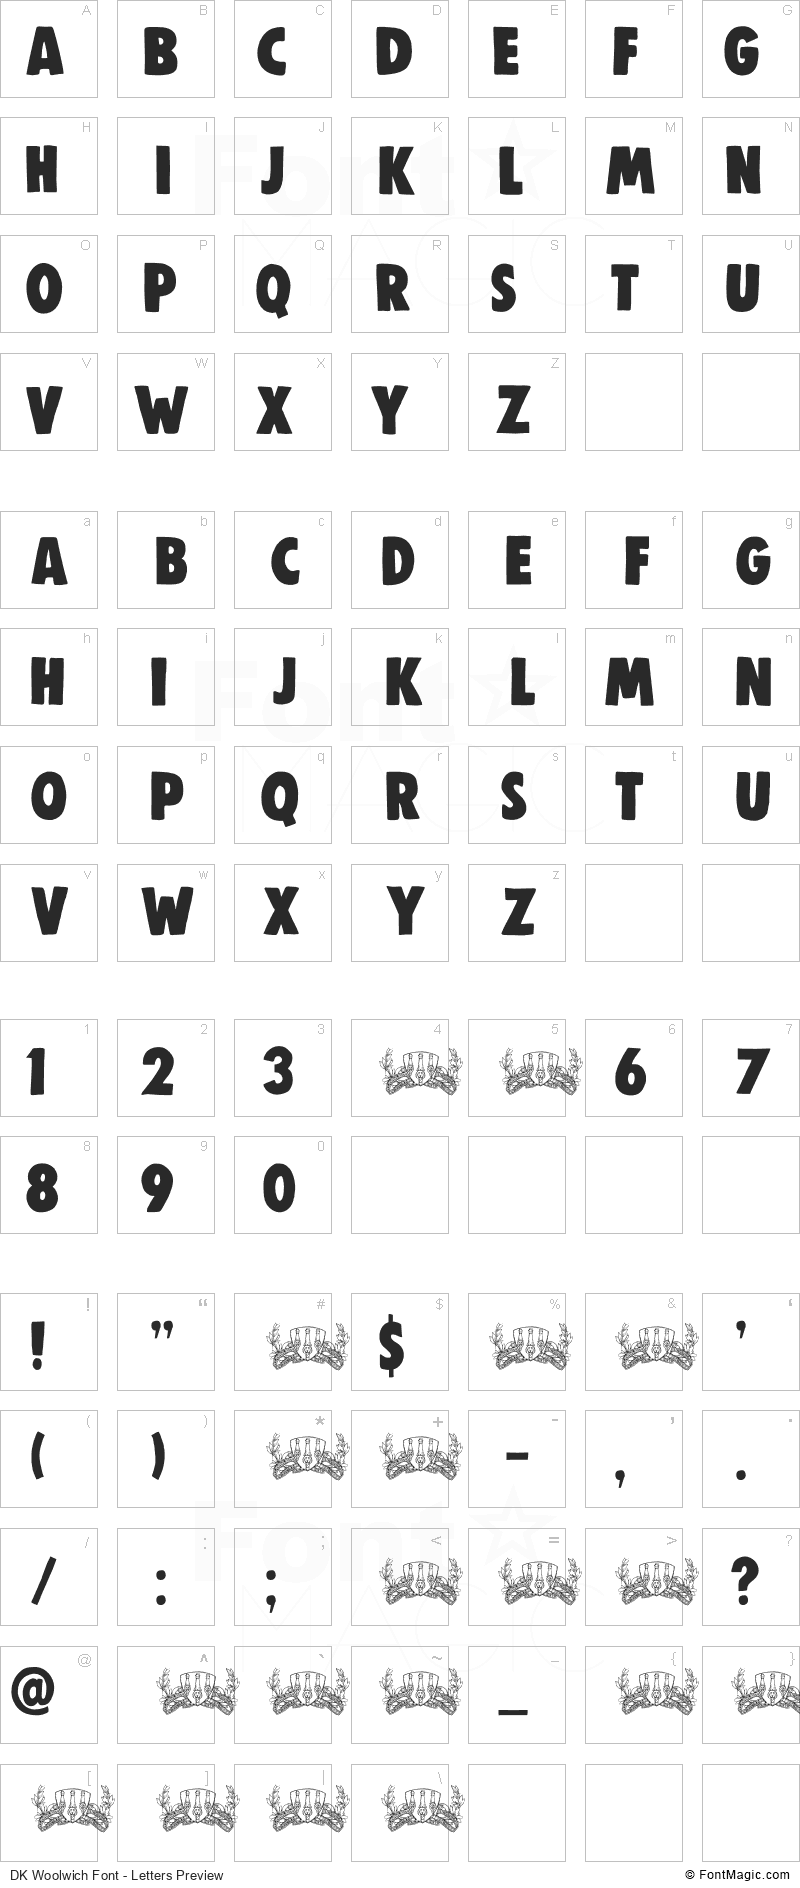 DK Woolwich Font - All Latters Preview Chart